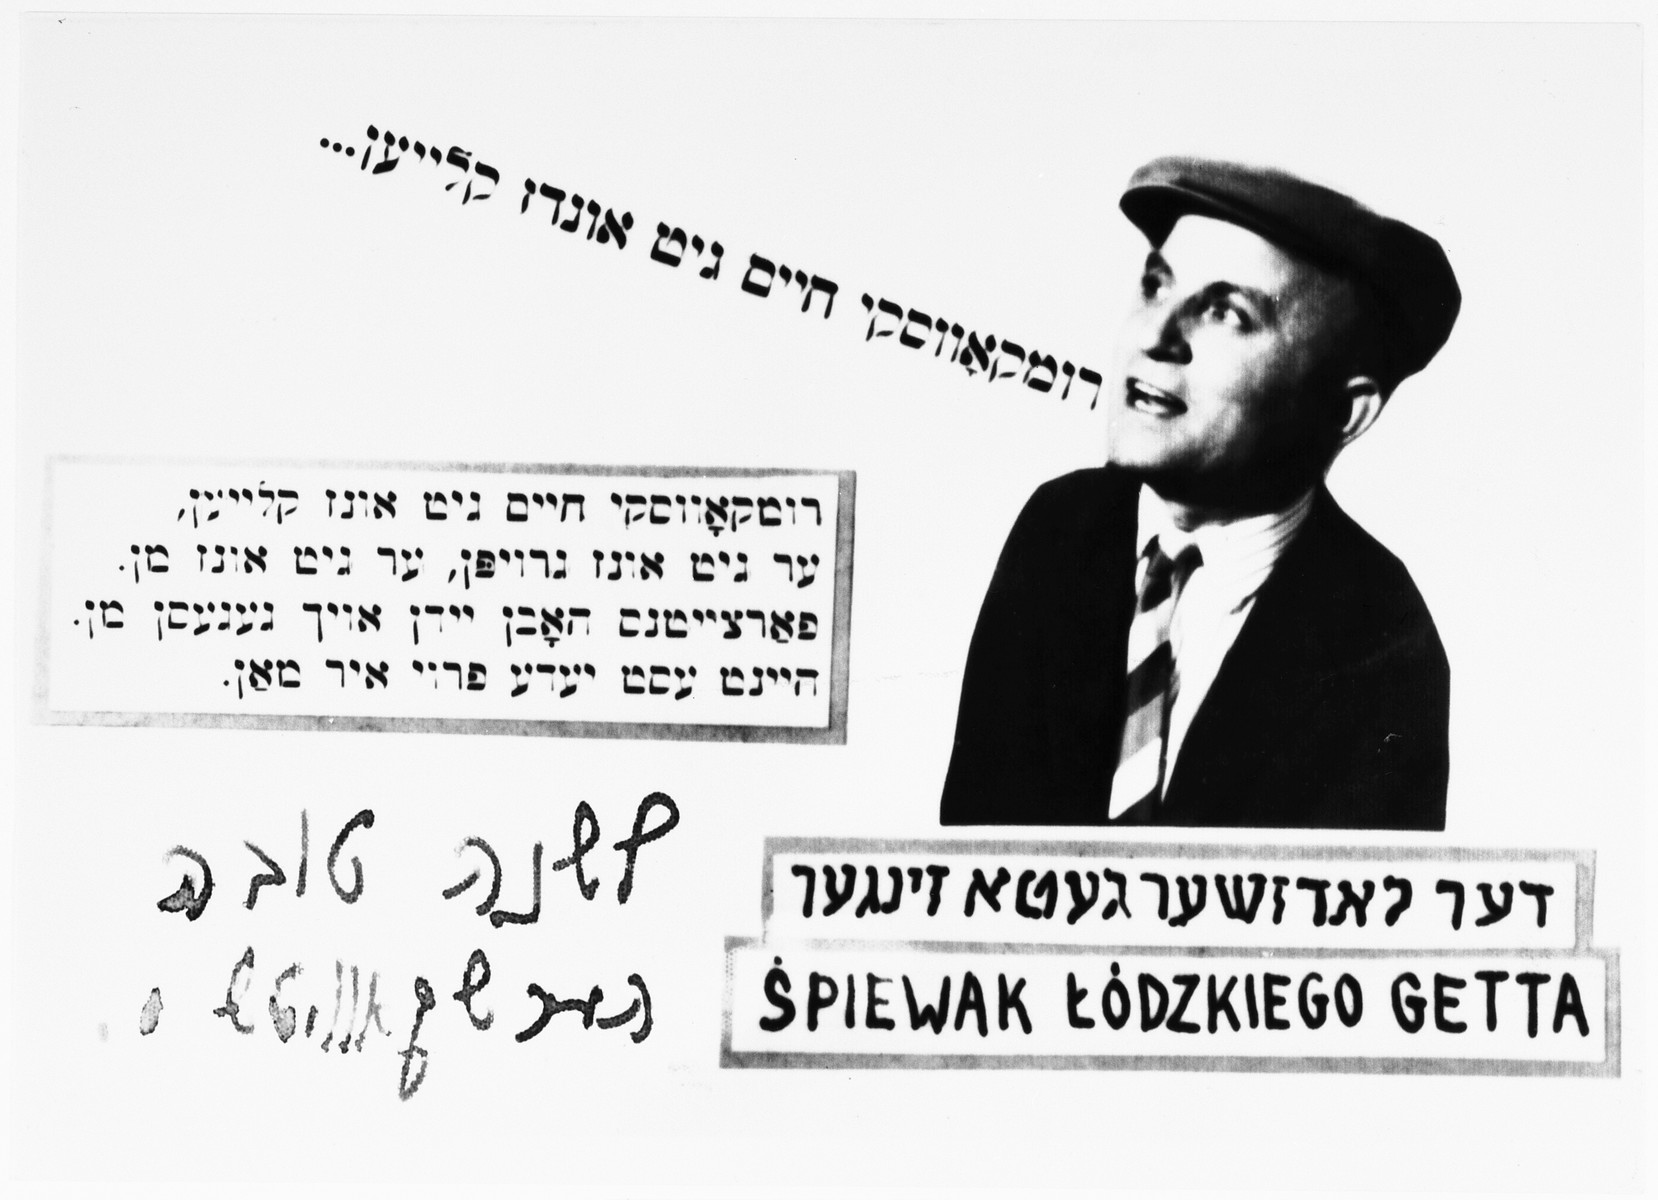 Jewish New Year's card from Jankiel Herszkowicz, showing the performer singing his famous parody about Mordechai Chaim Rumkowski, chairman of the Lodz ghetto Jewish council.